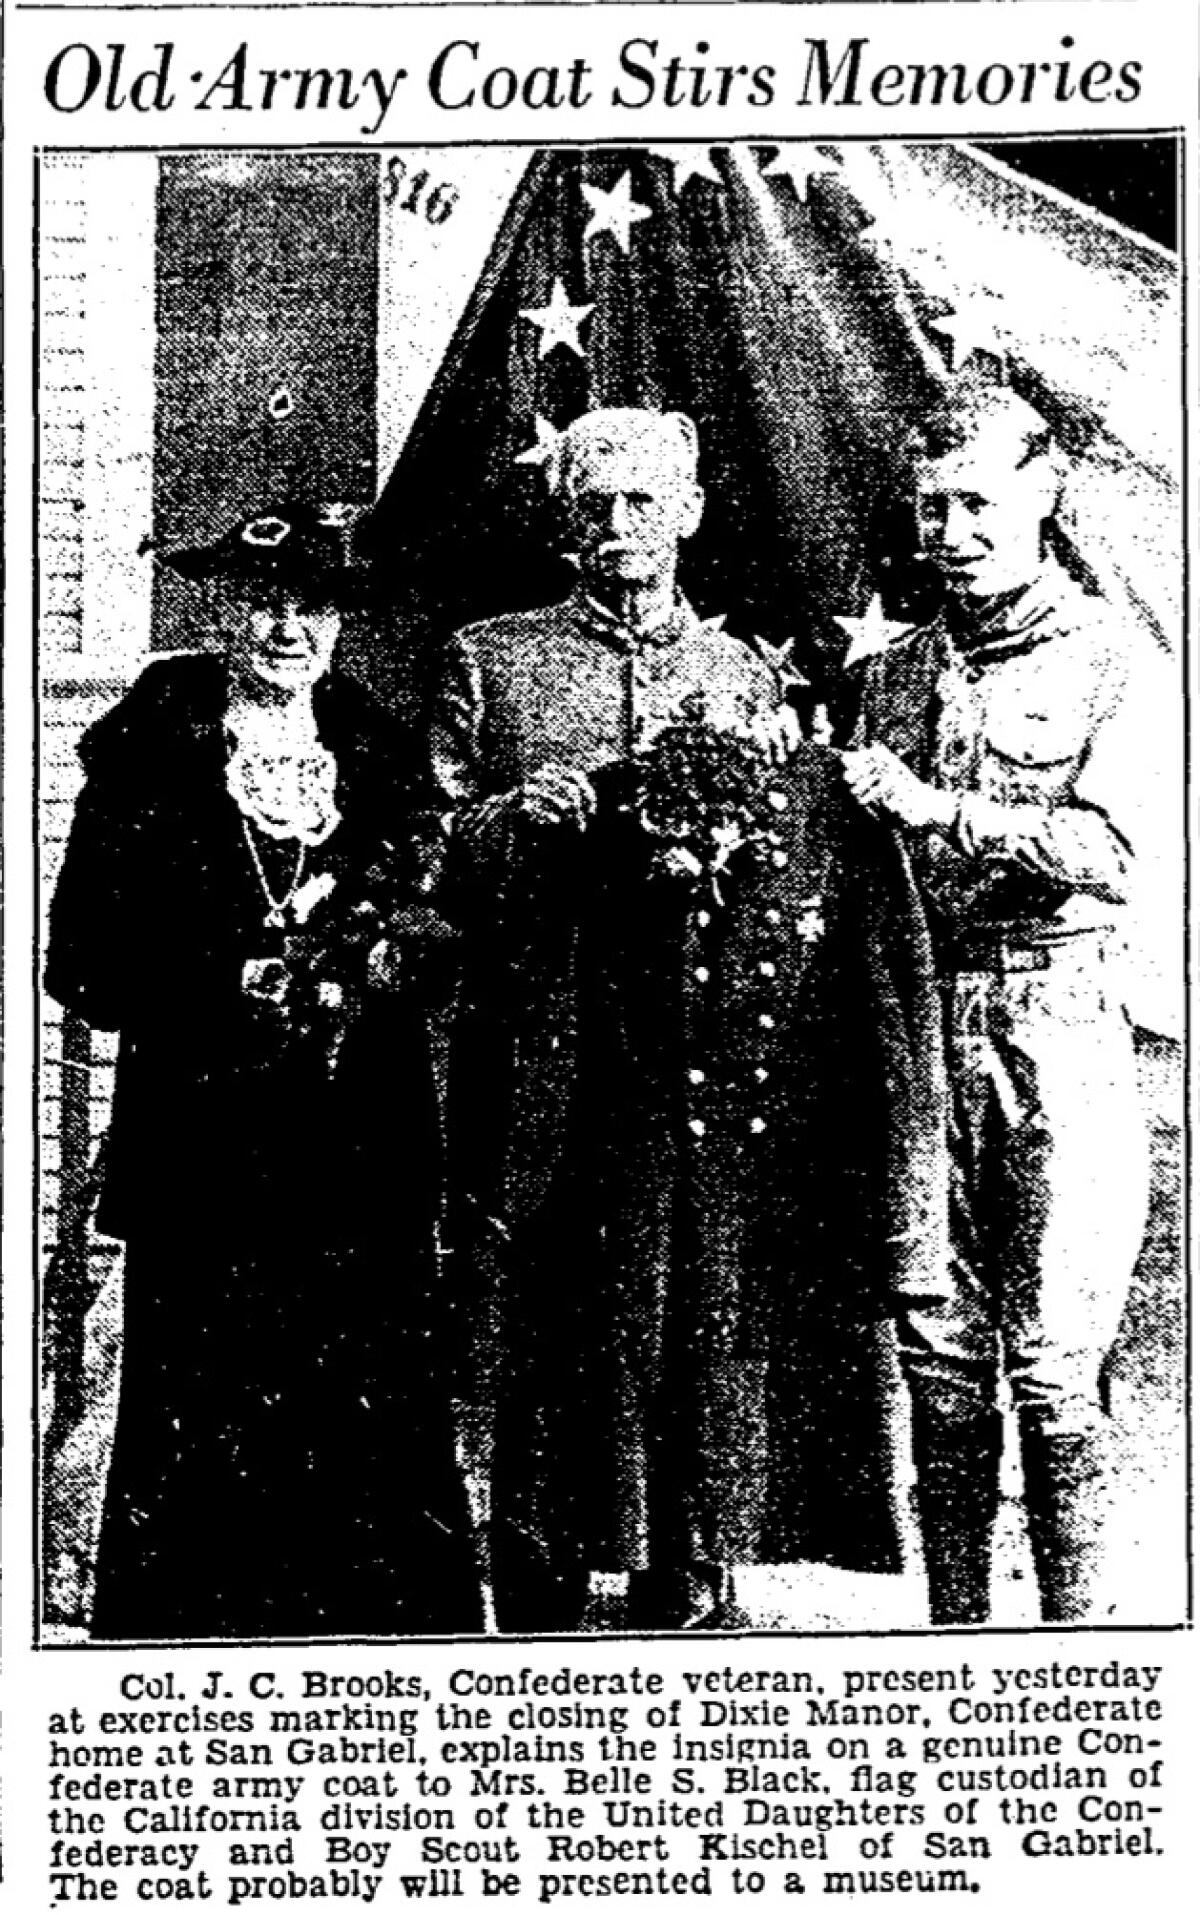 Newspaper clipping. Older man holds military coat, flanked by woman on left and Boy Scout on right.